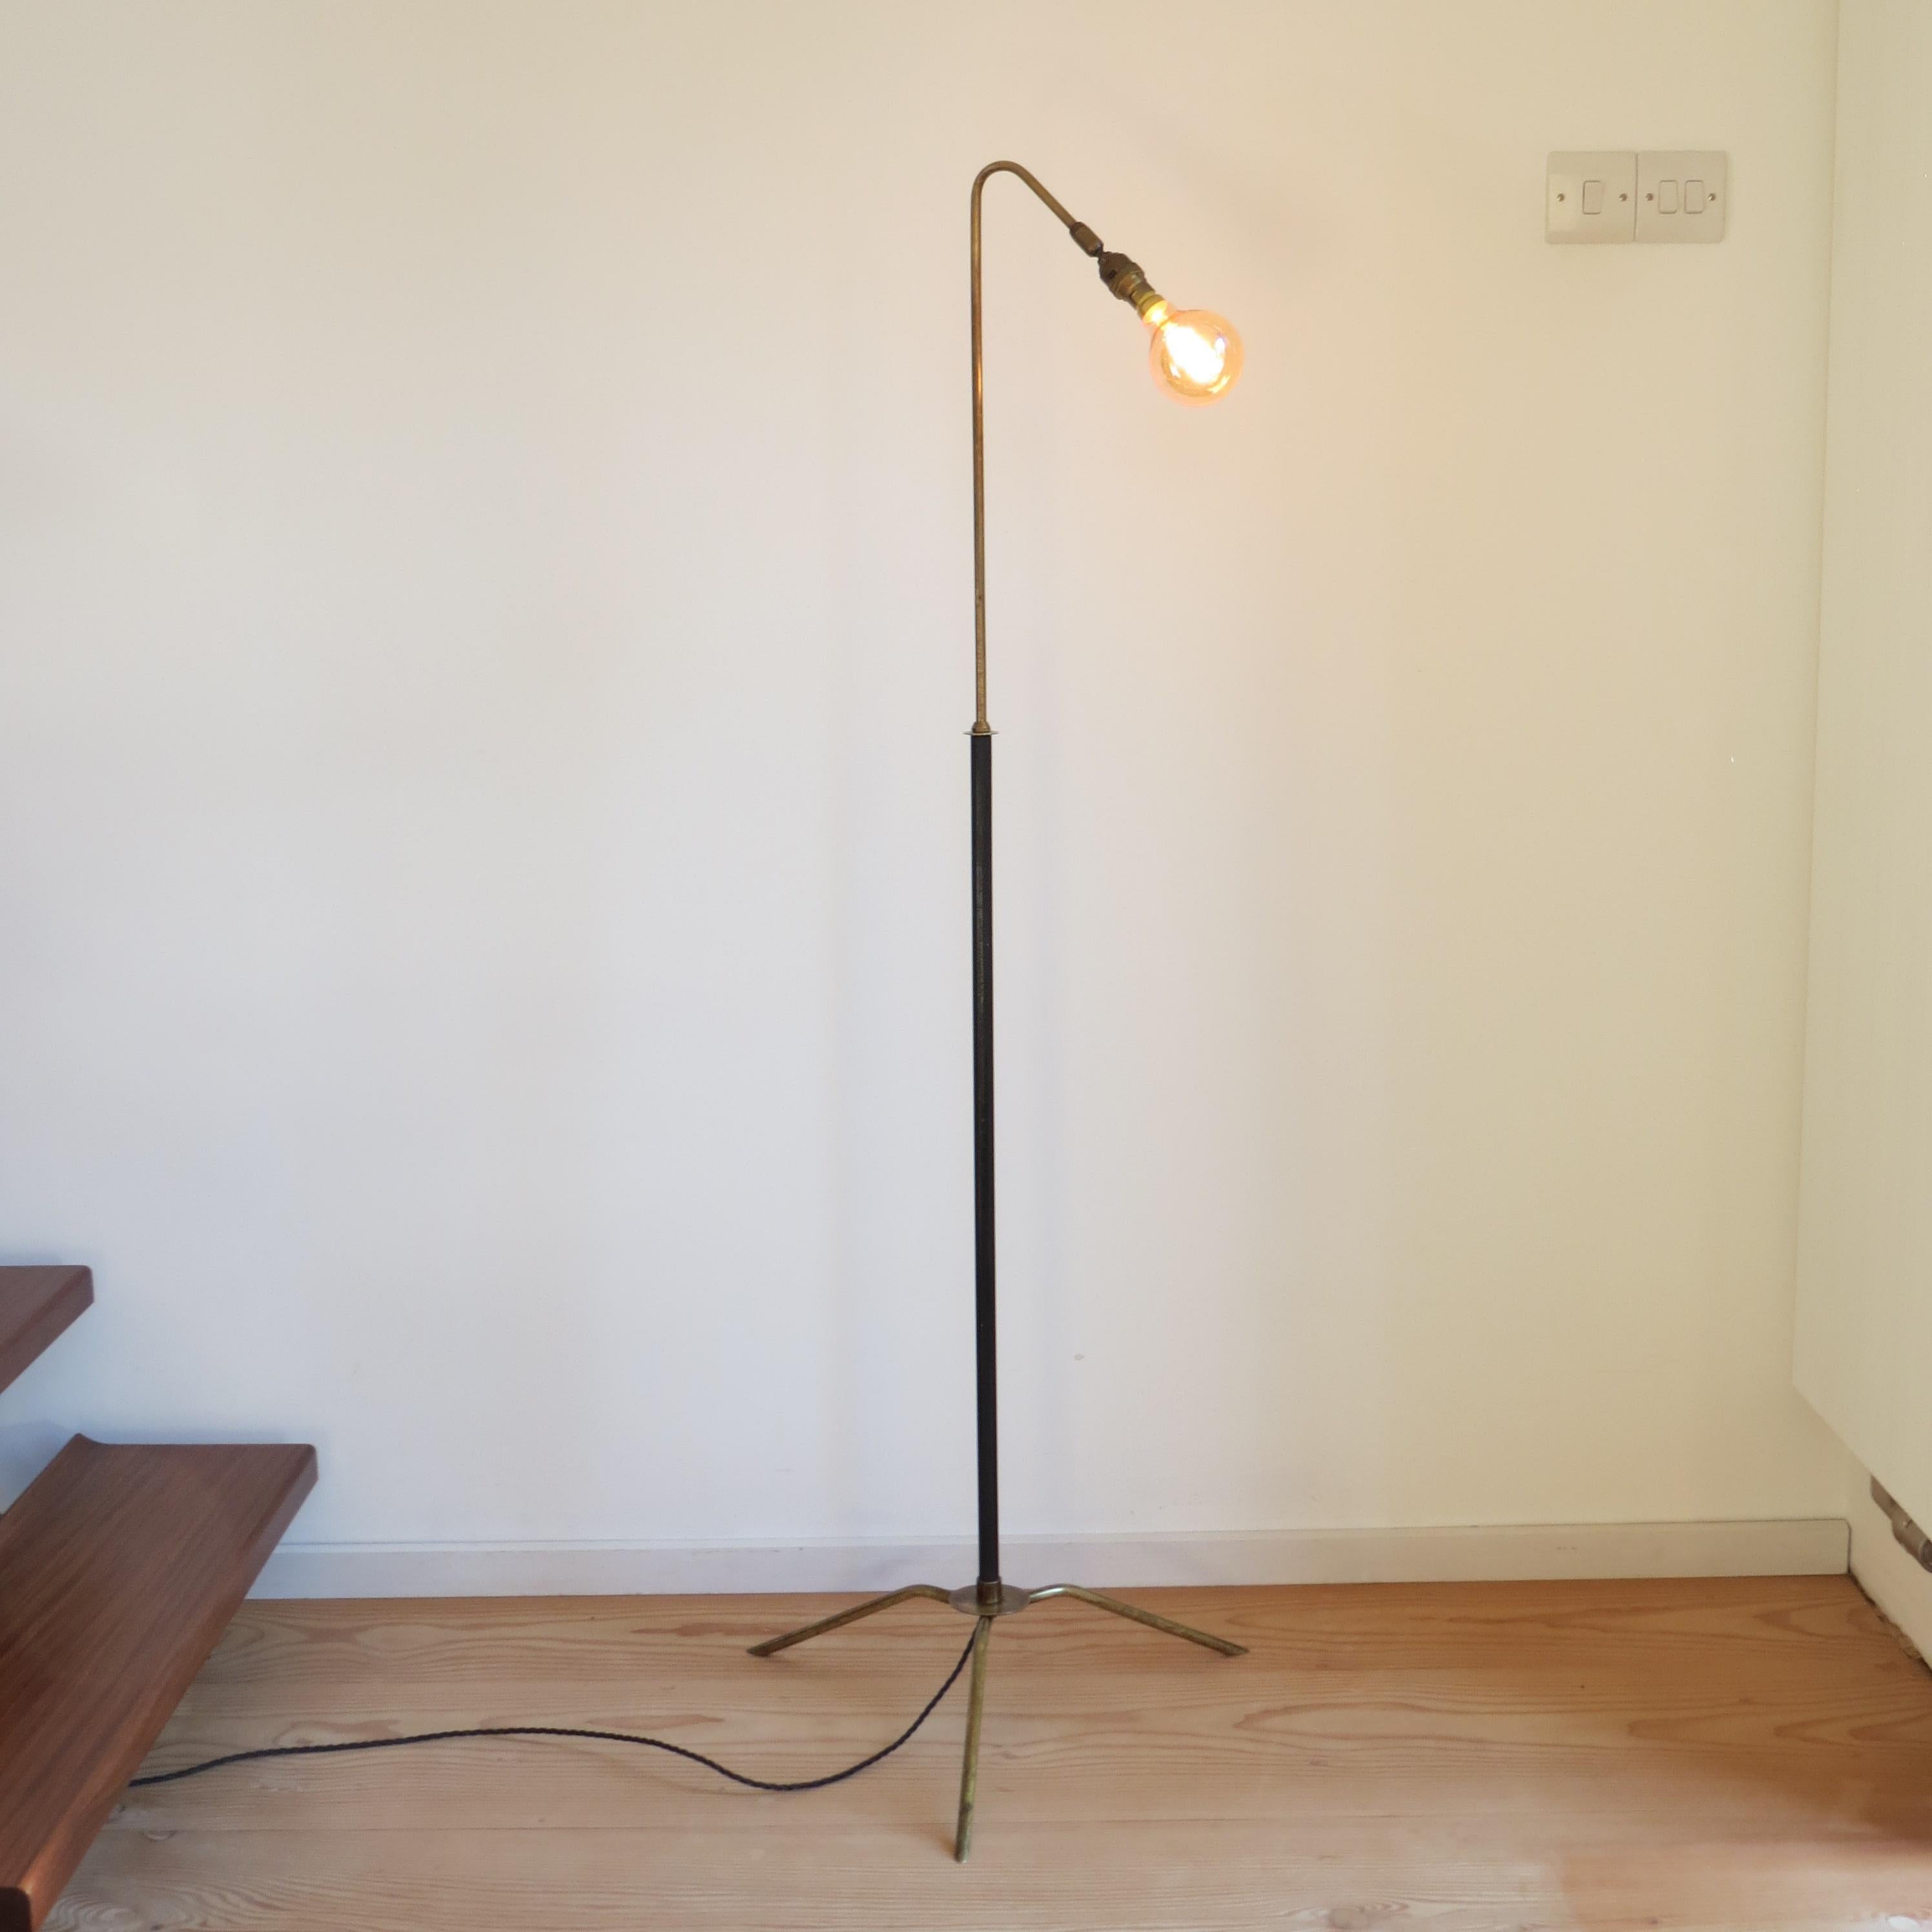 Wonderful 1950s adjustable Industrial style floor lamp.
Stylish brass legs with black metal upright and adjustable curve over brass neck. The lamp is adjustable and the brass curved neck can be extended to vary the height. The height varies from